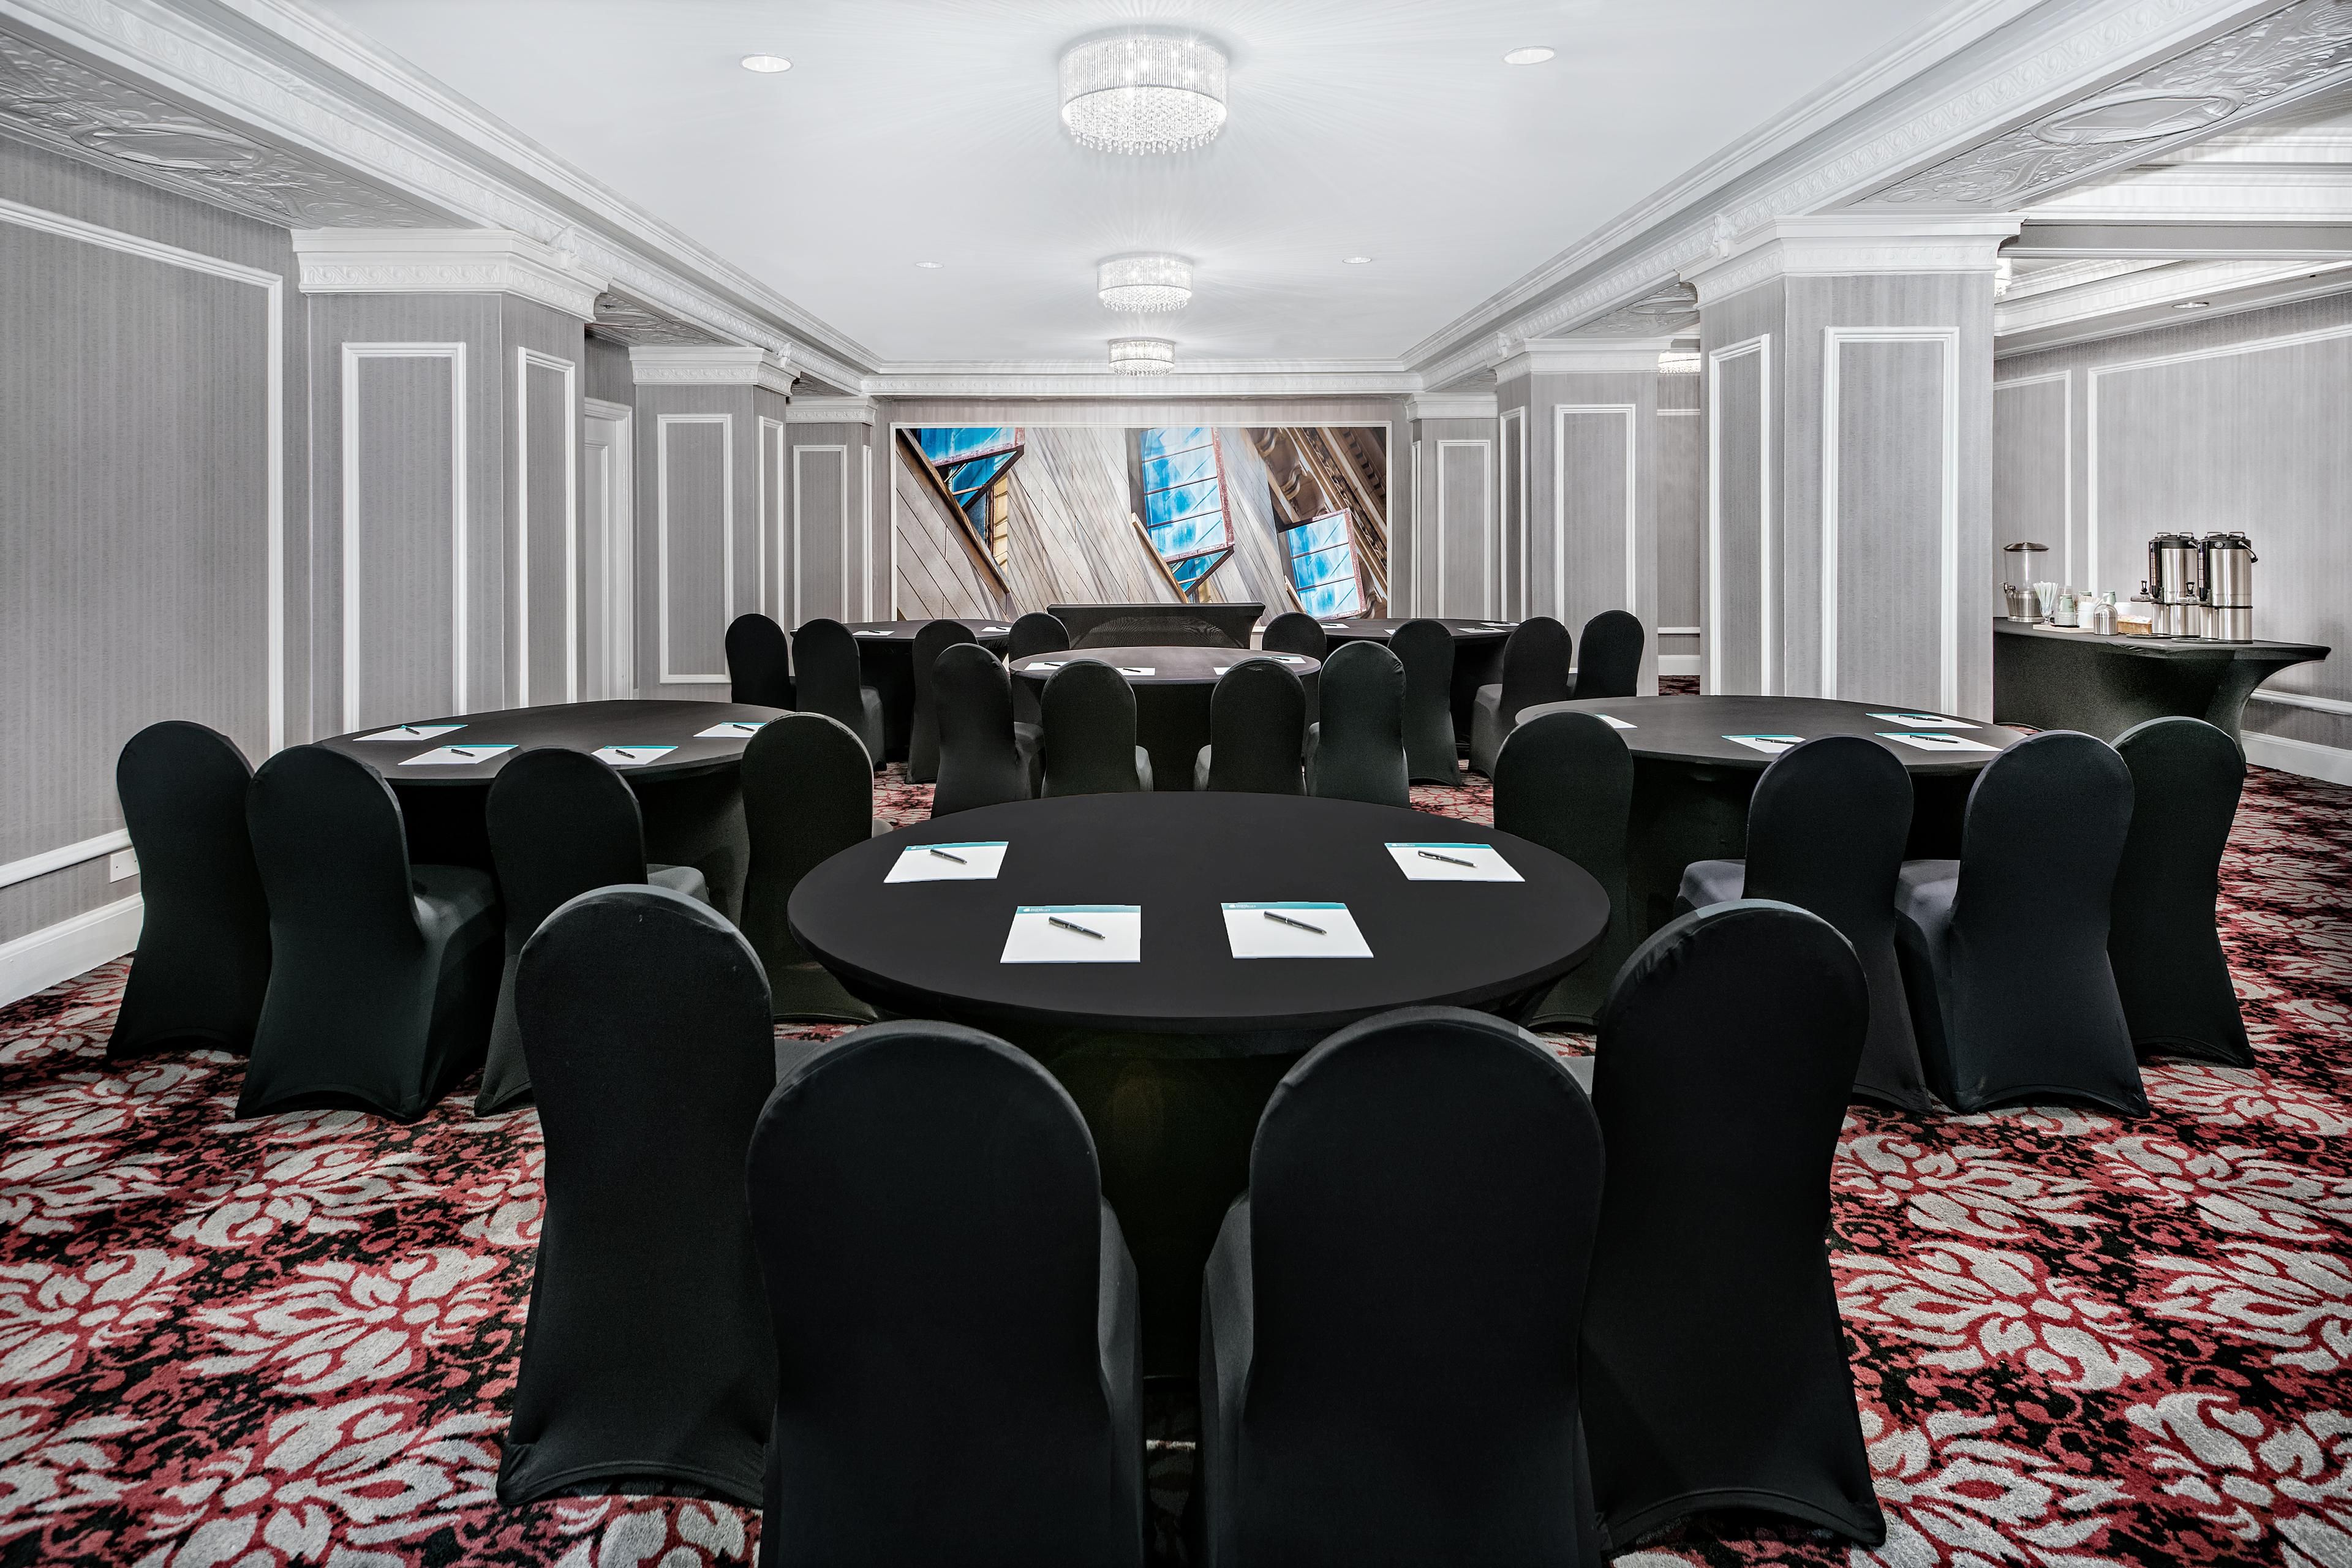 Plan your meetings, weddings, and gatherings in more than 4,000 square feet of meeting space in downtown Dallas. Host business and social events in six distinctive venues, including the Majestic Ballroom and the historic Conrad Boardroom, with exceptional catering, technology support, and Texas hospitality. 